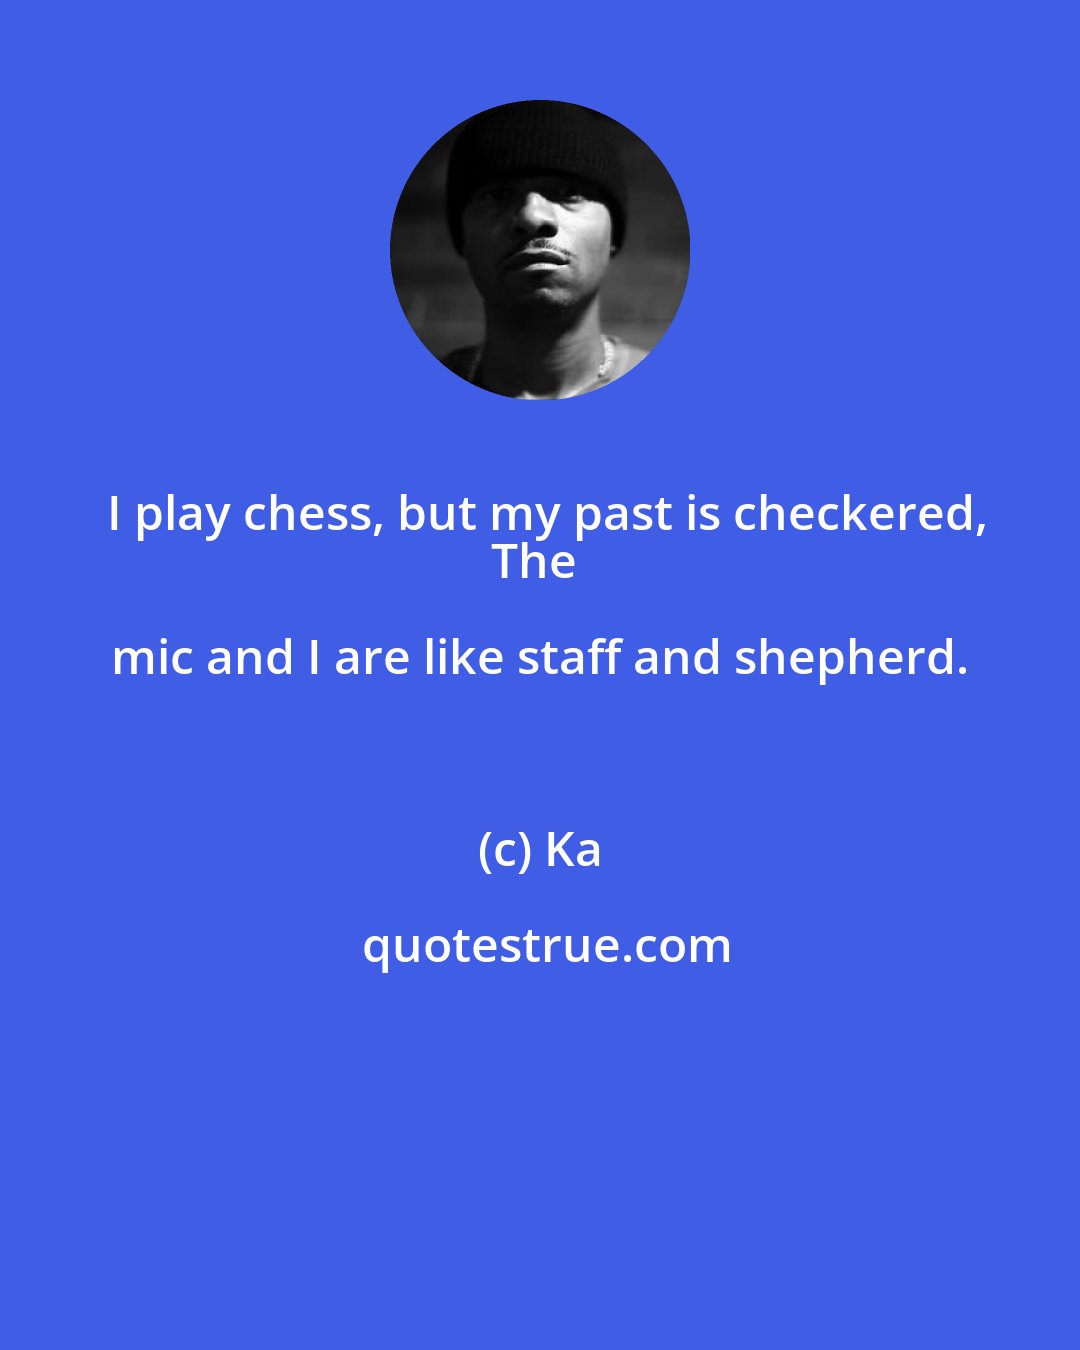 Ka: I play chess, but my past is checkered,
The mic and I are like staff and shepherd.